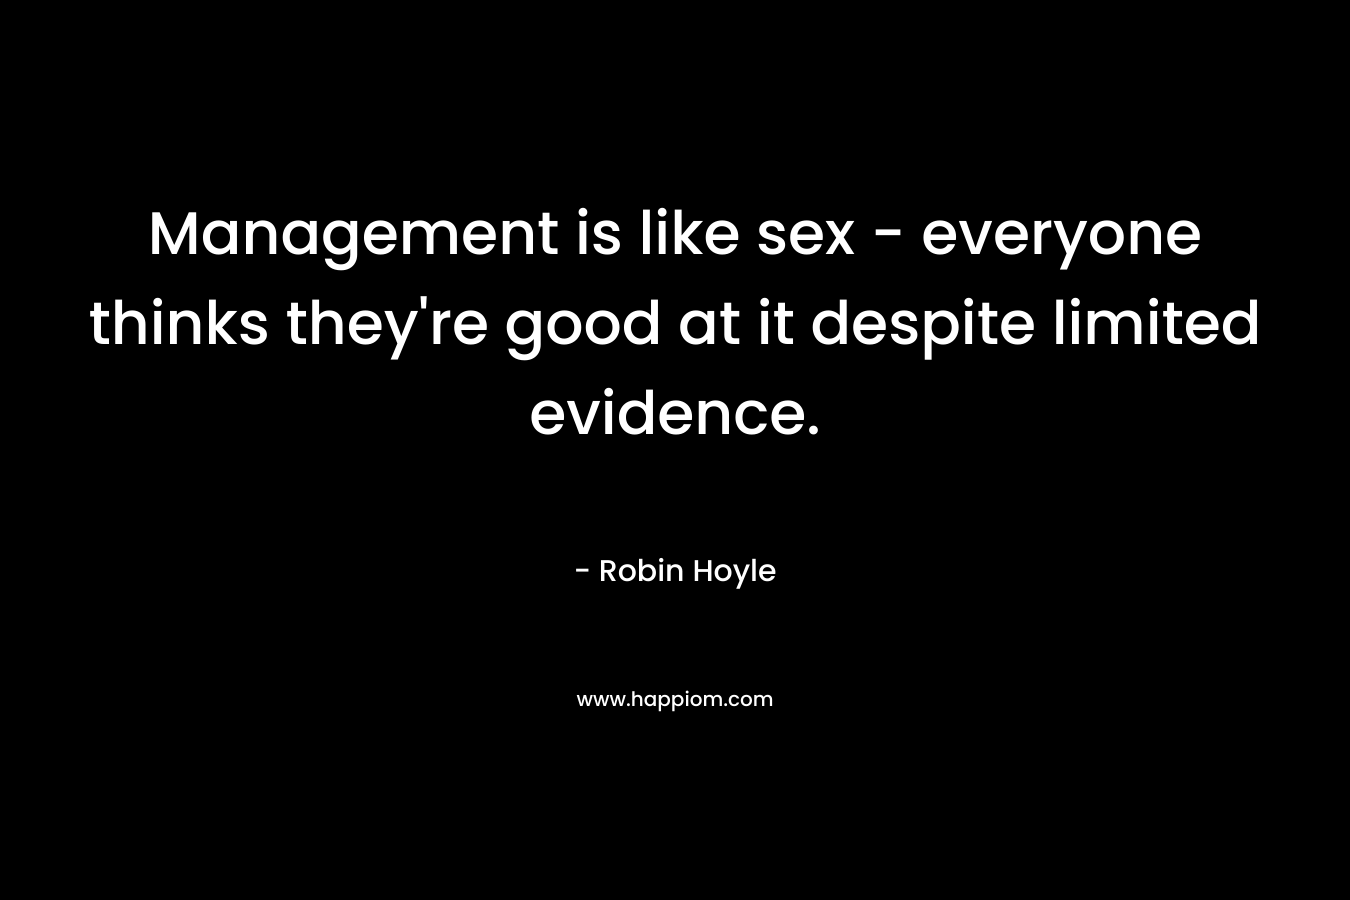 Management is like sex - everyone thinks they're good at it despite limited evidence.